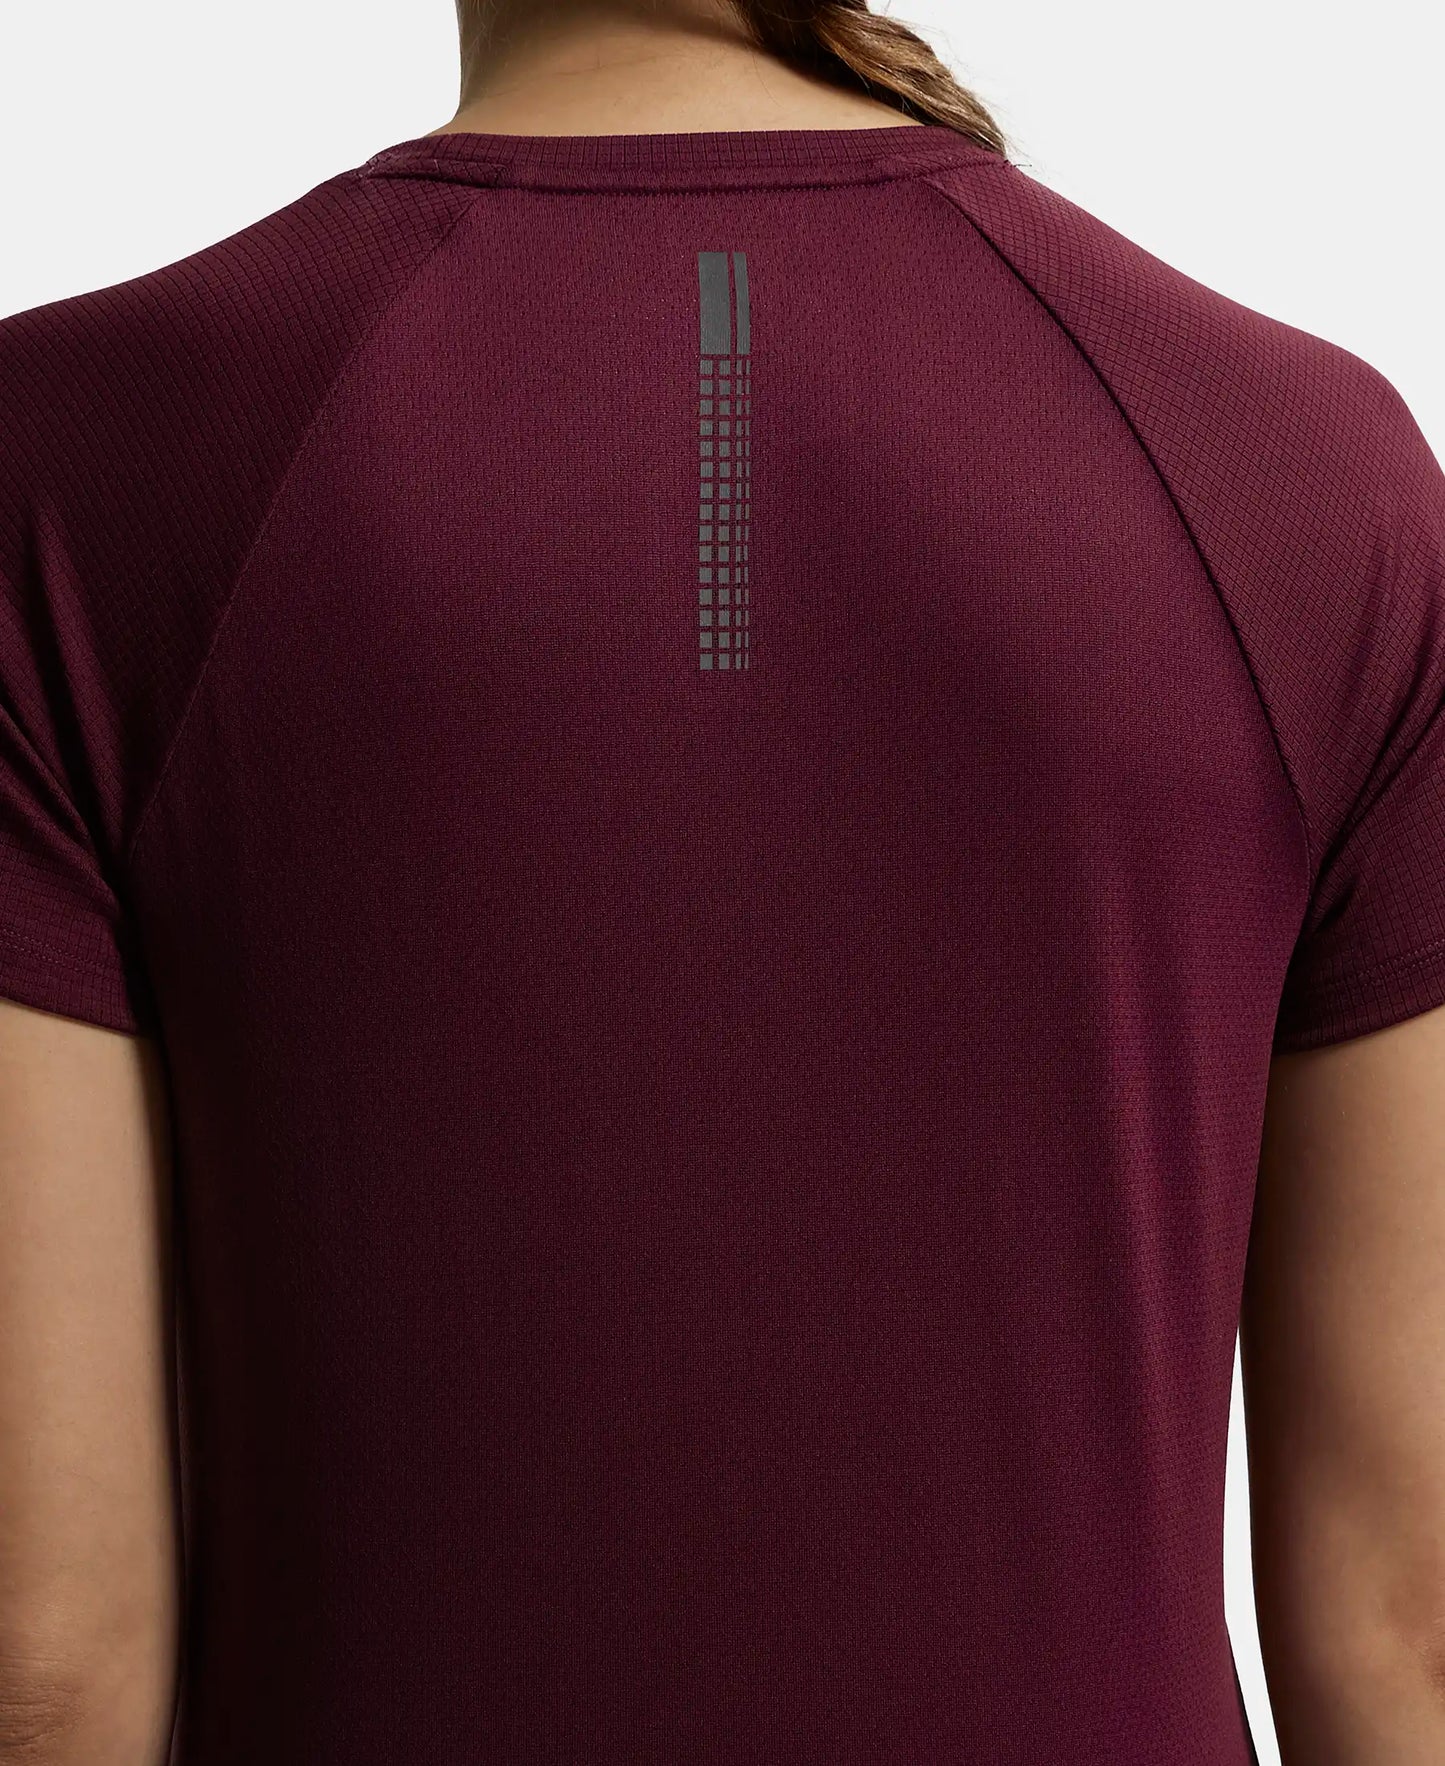 Microfiber Fabric Relaxed Fit Half Sleeve Breathable Mesh T-Shirt - Grape Wine-7